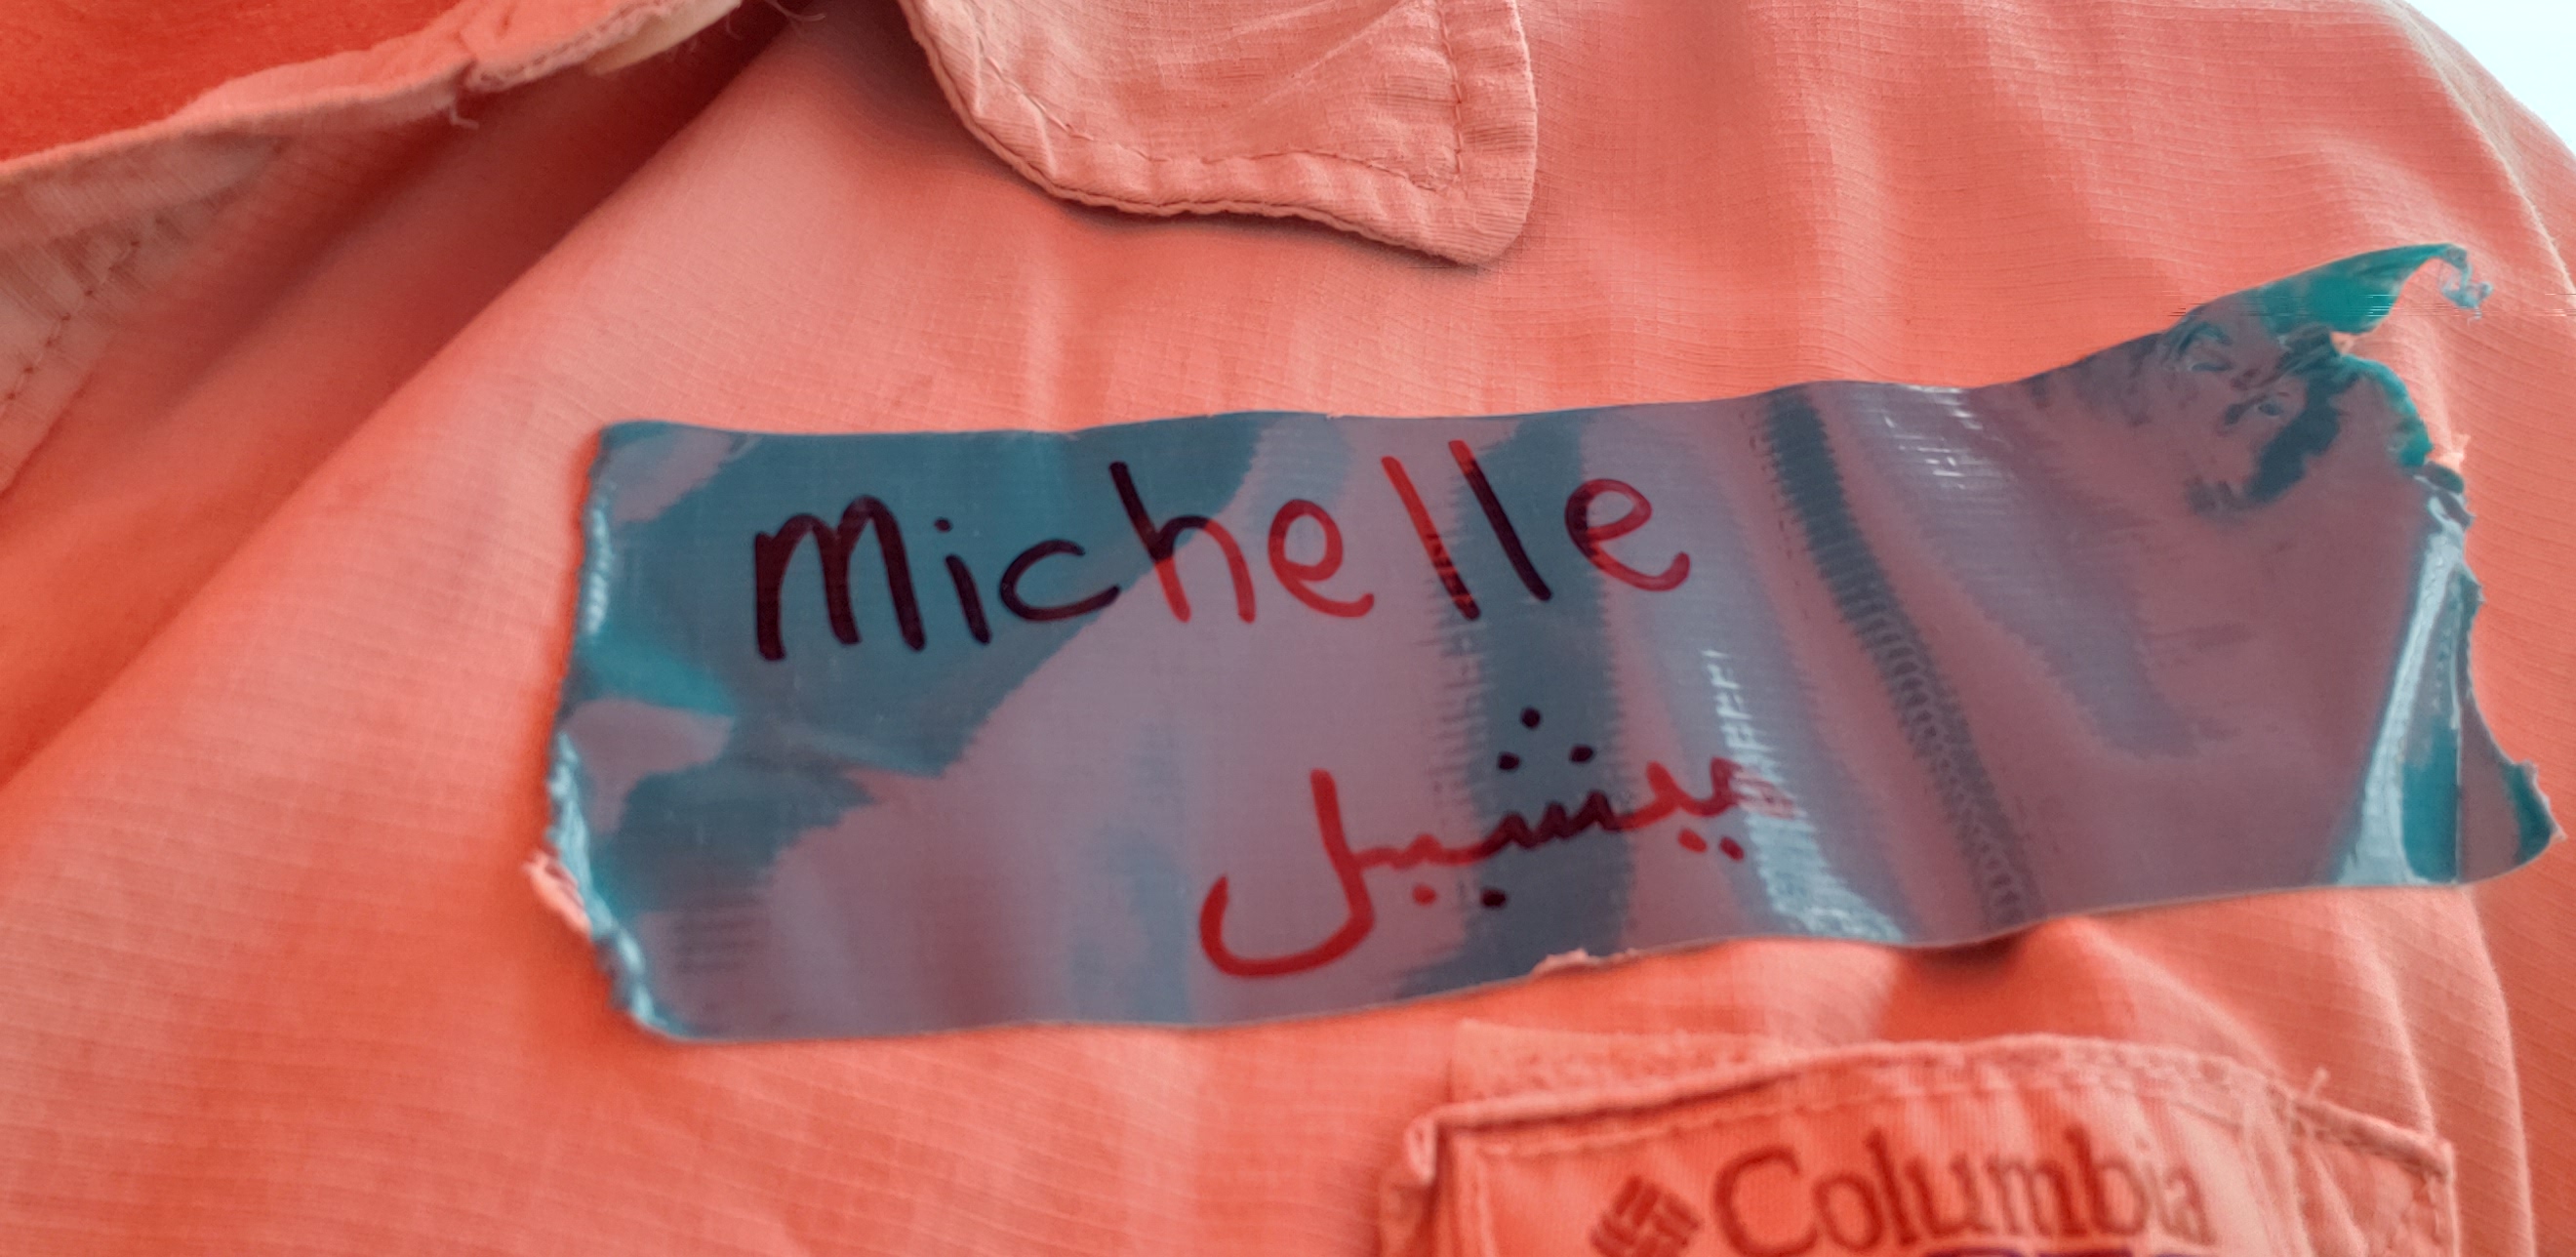 Michelle's name tag